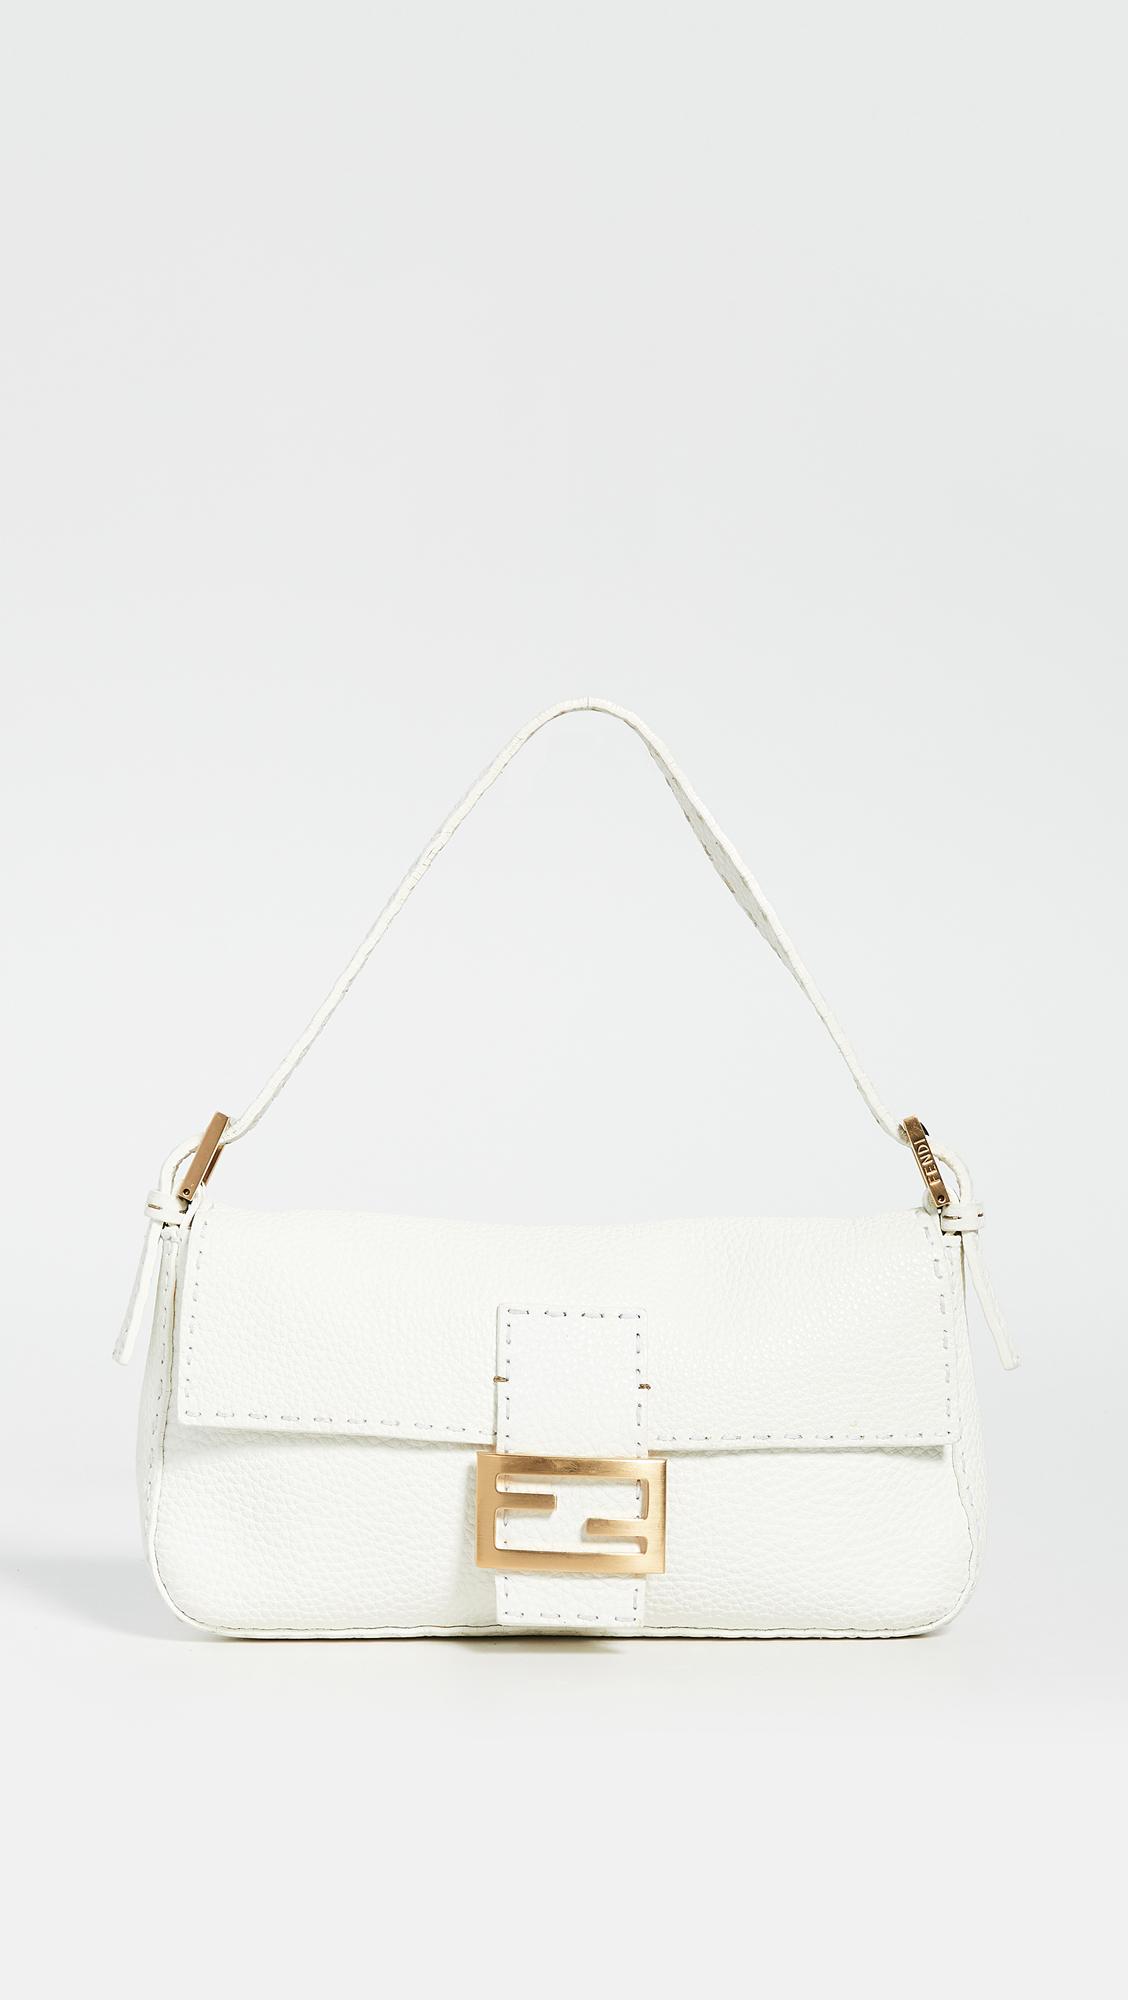 Baguette - White leather bag